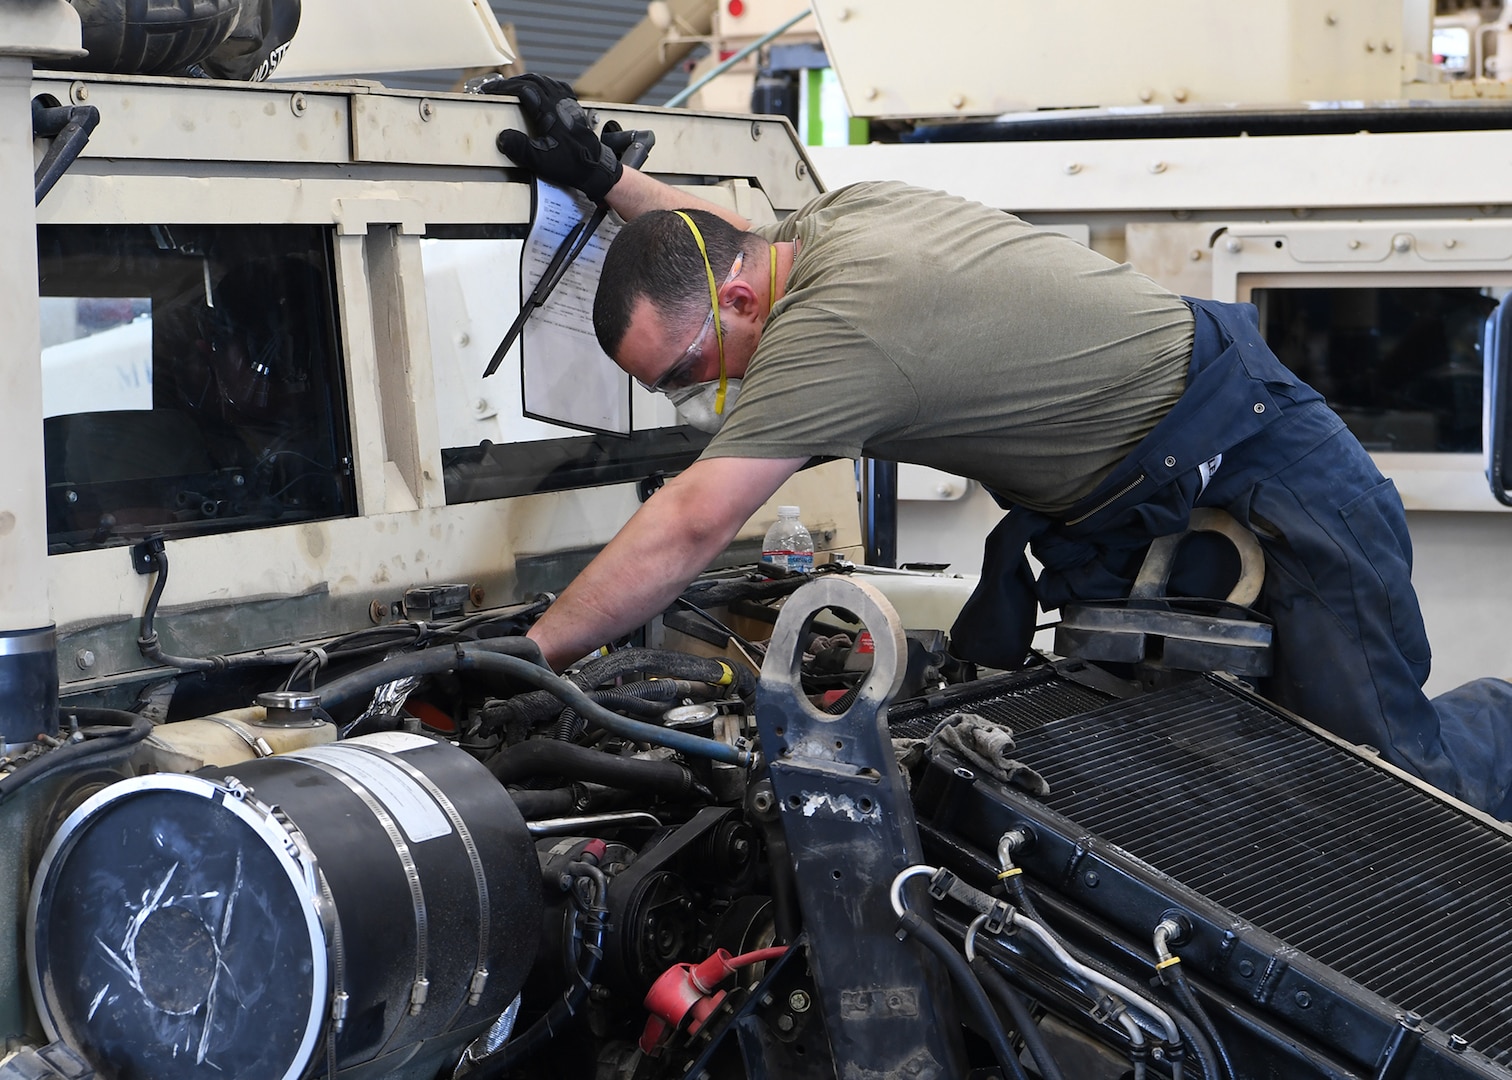 U.S. Army Spc. Koby Riggan, a radio technician with the California Army National Guard’s 270th Military Police Company, works on a Humvee, April 28, 2020, at the Cal Guard's Field Maintenance Shop 22, in Sacramento. The Cal Guard has been using these vehicles to support humanitarian missions throughout the state.